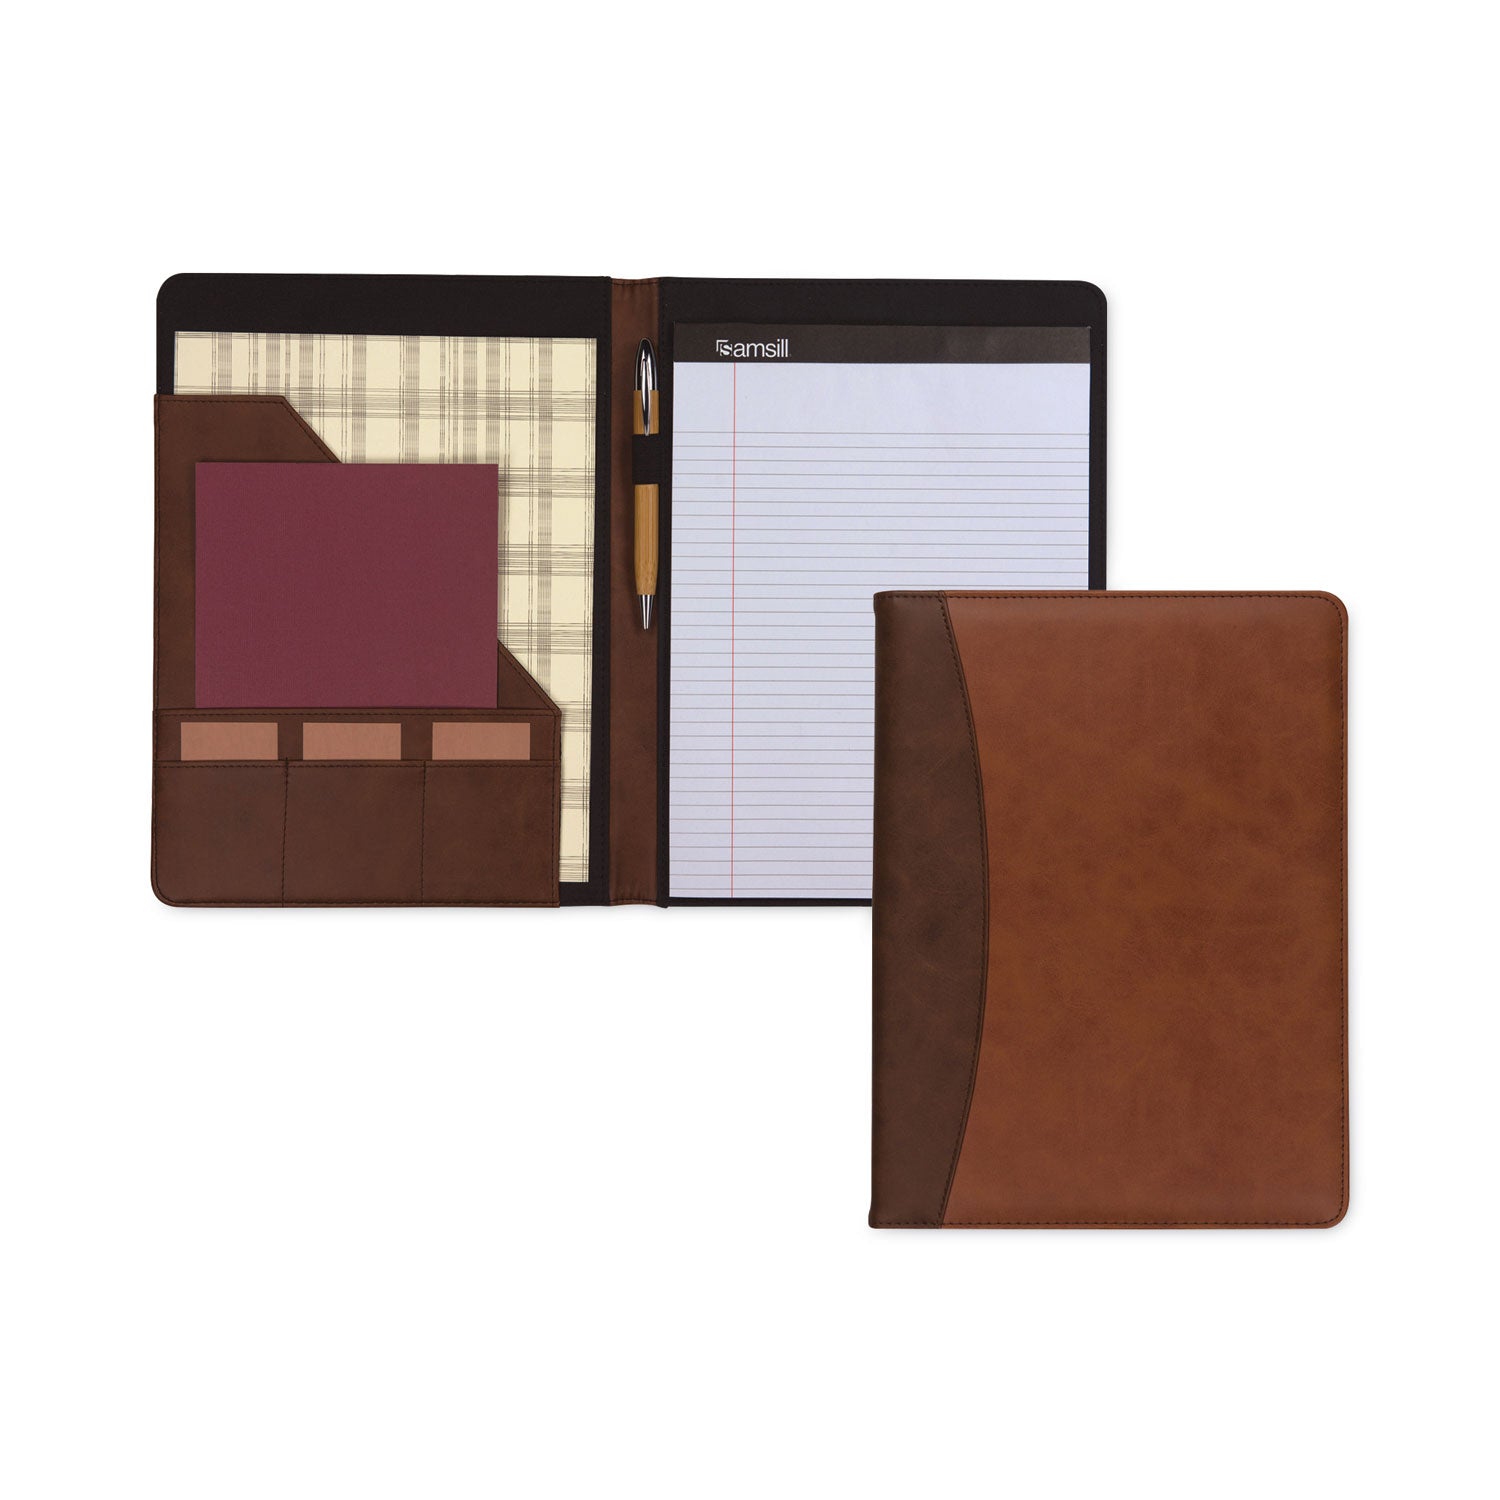 two-tone-padfolio-with-spine-accent-106w-x-1425h-polyurethane-tan-brown_sam71656 - 3